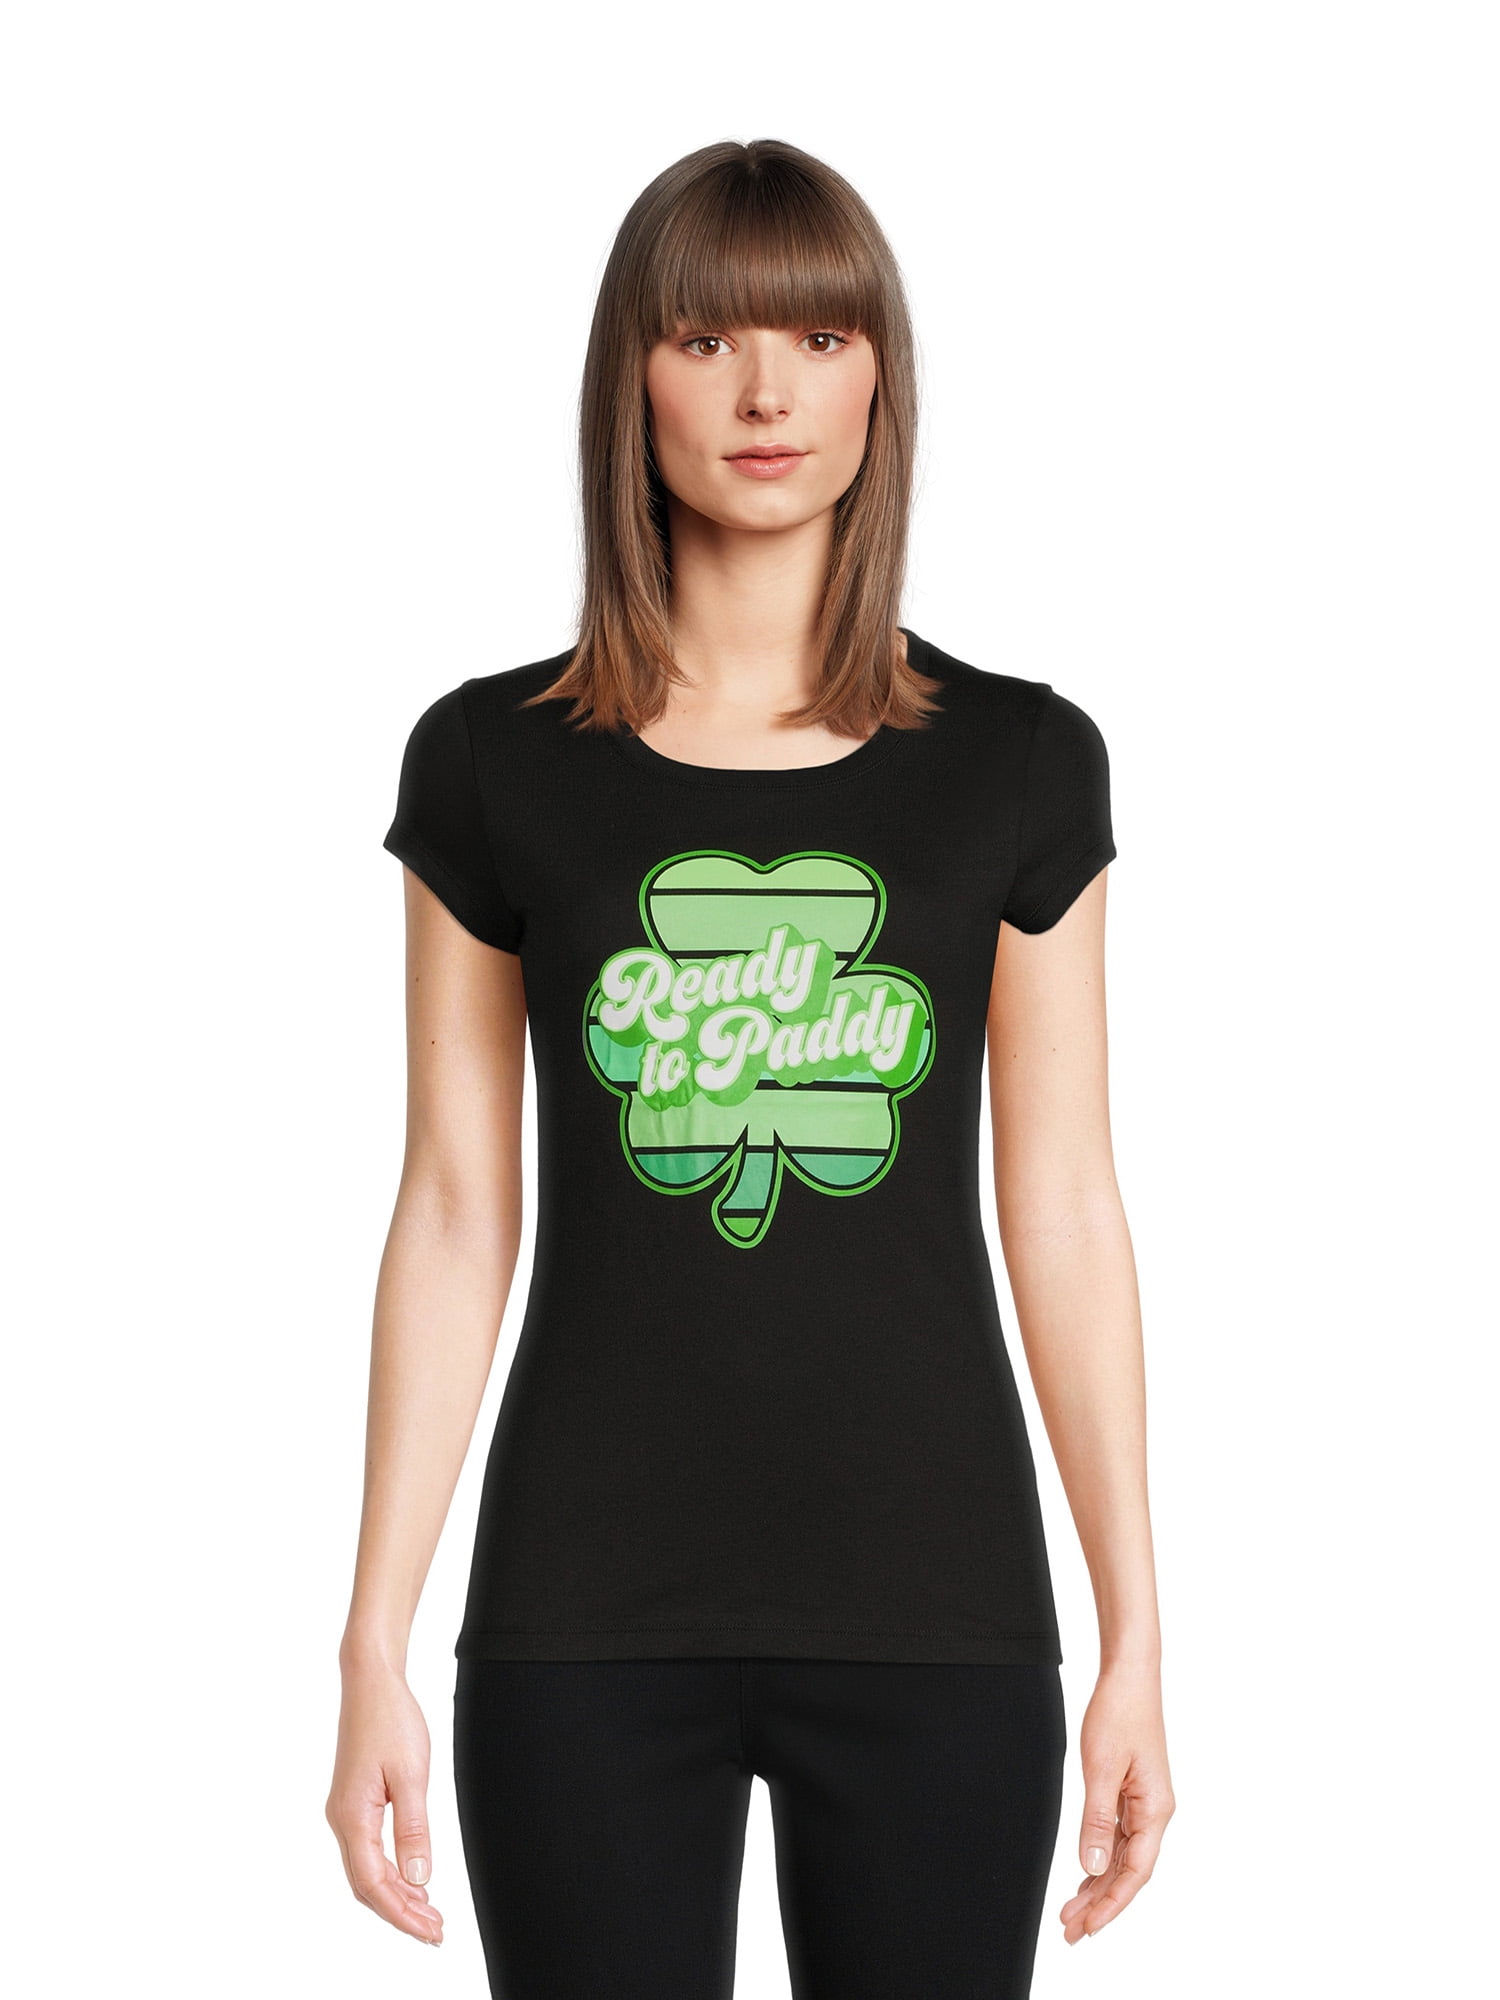 St Patricks Ready to Paddy  Womens Graphic T-Shirt